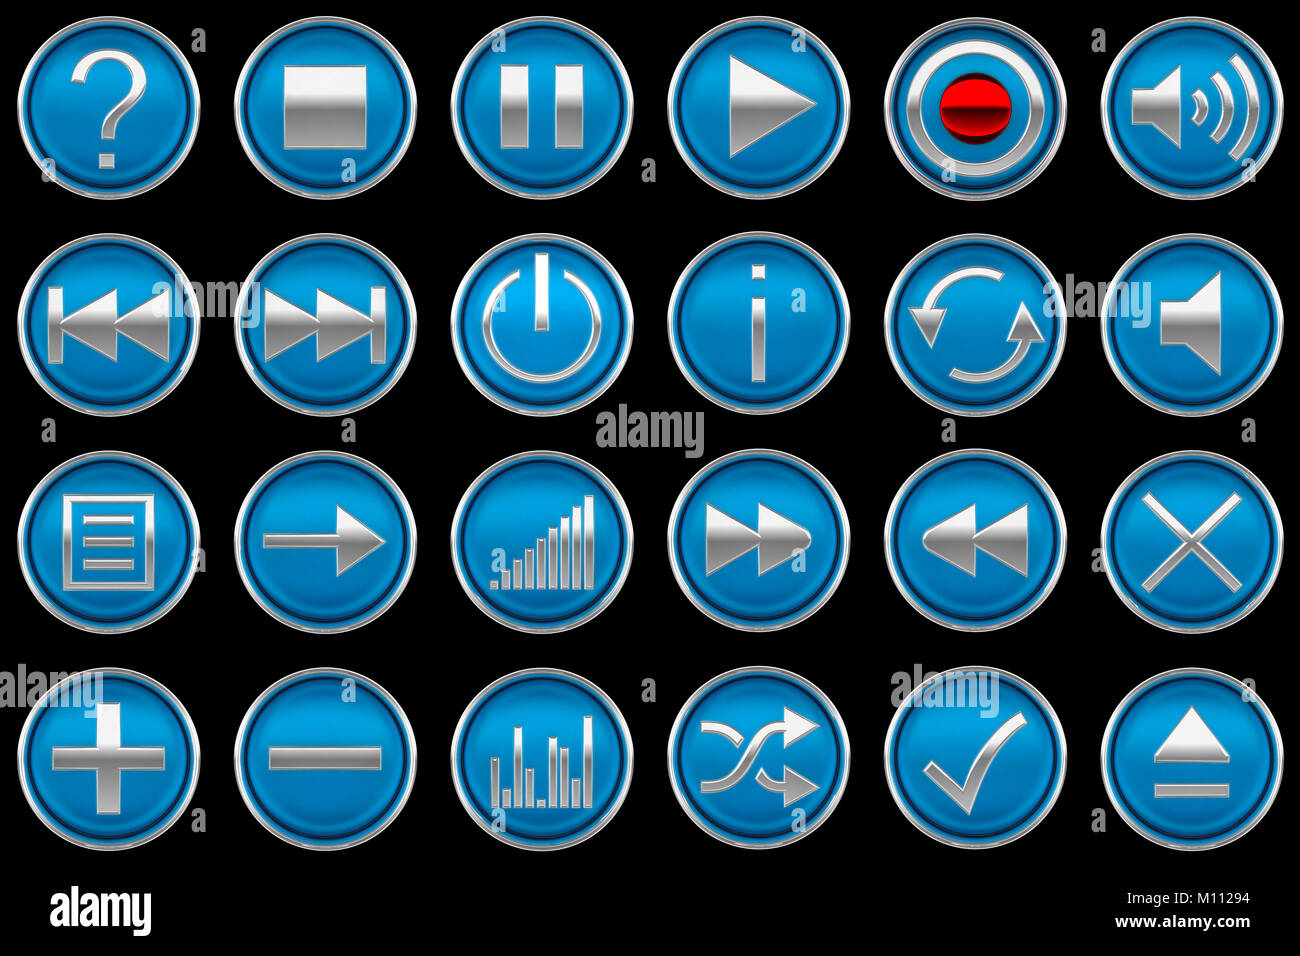 Pressed blue Control panel buttons isolated on black Stock Photo